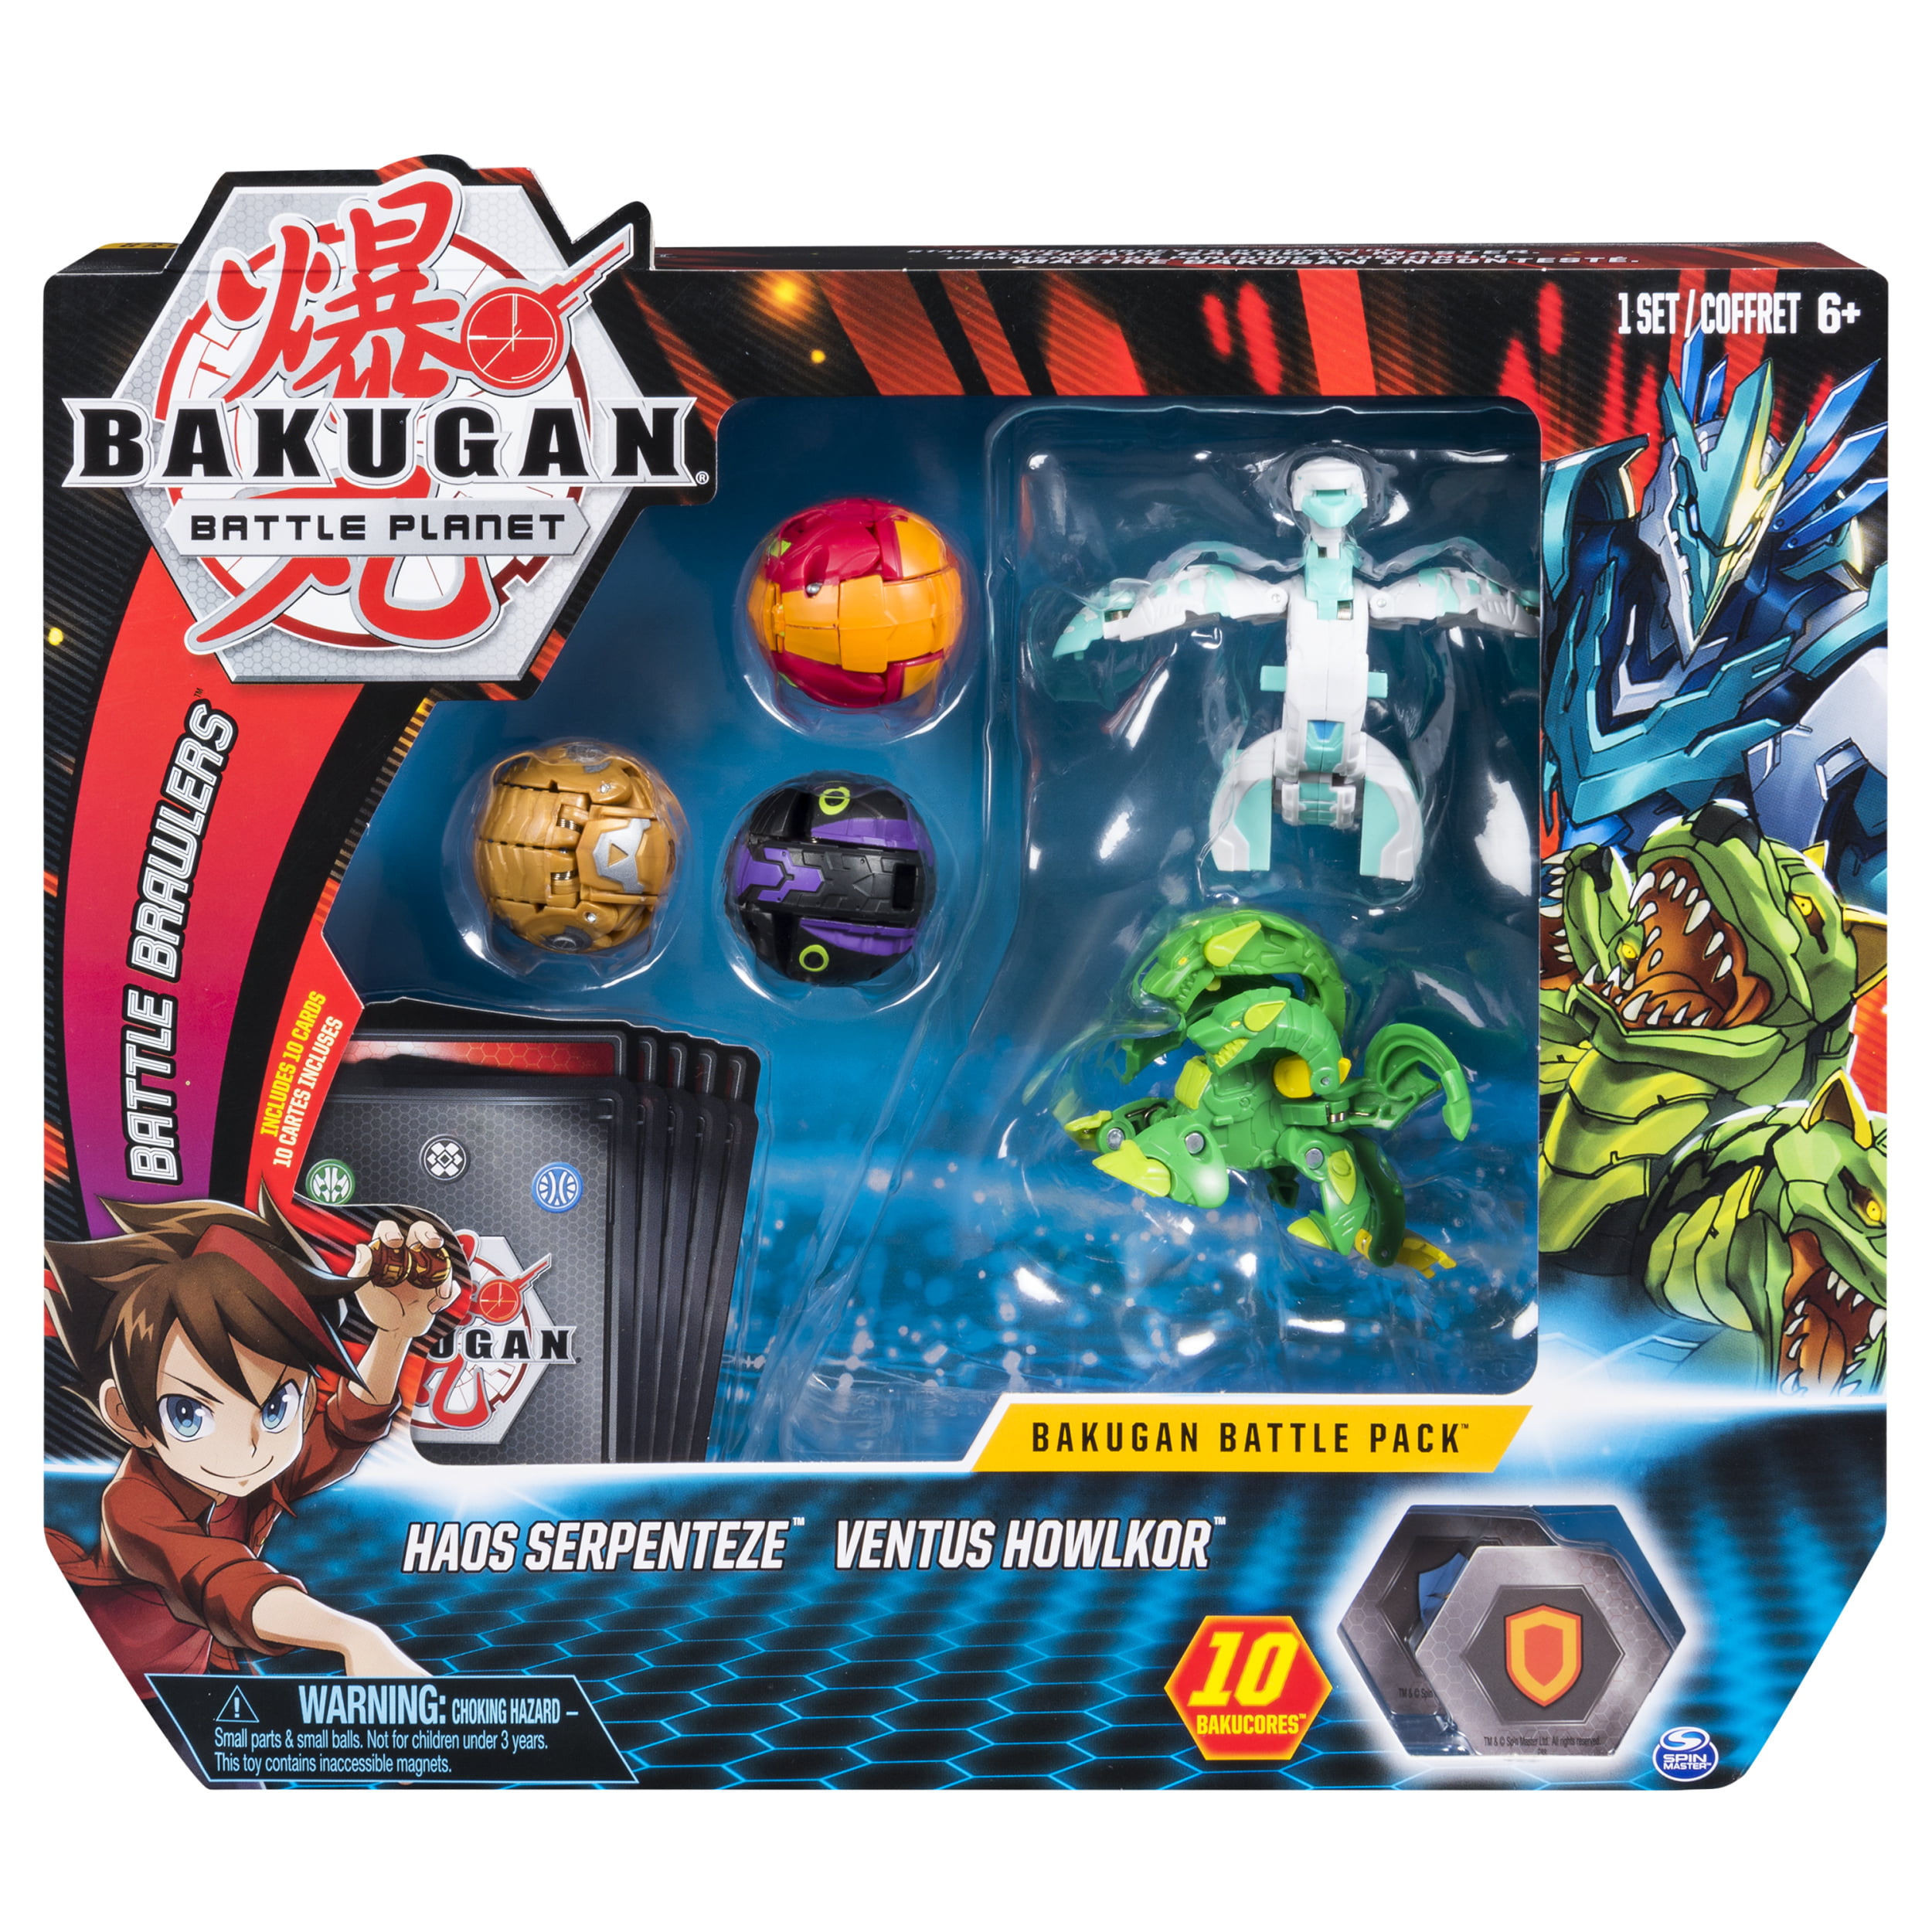 Bakugan, Battle Pack 5-Pack, Haos Serpenteze and Ventus Howlkor,  Collectible Cards and Action Figure Sets, for Ages 6 and up